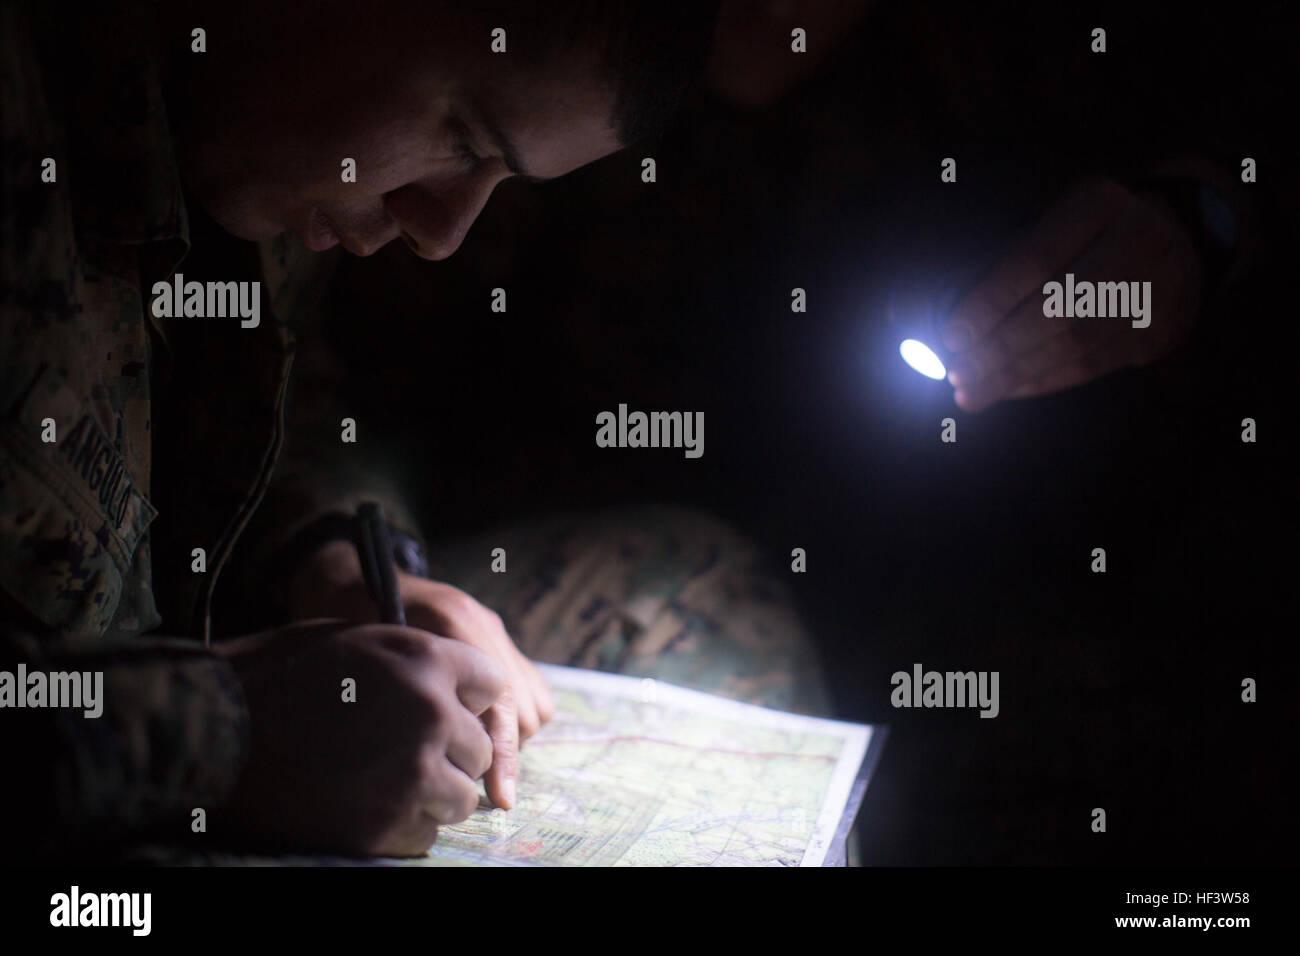 A U.S. Marine from the School of Infantry-East, plots points on a map during the night land navigation portion of the Combat Instructor Stakes on Camp Lejeune, N.C., March 16, 2015. The School of Infantry-East hosted the Combat Instructor Stakes, which is a grueling 30-hour competition that pits two man teams against each other, competing in physical, tactical and knowledge based events while carrying a combat load and moving over 50 kilometers on foot. (U.S. Marine Corps photo by SOI-East Combat Camera, Cpl. Andrew Kuppers/ Released) CI Stakes 2016 160316-M-NT768-013 Stock Photo